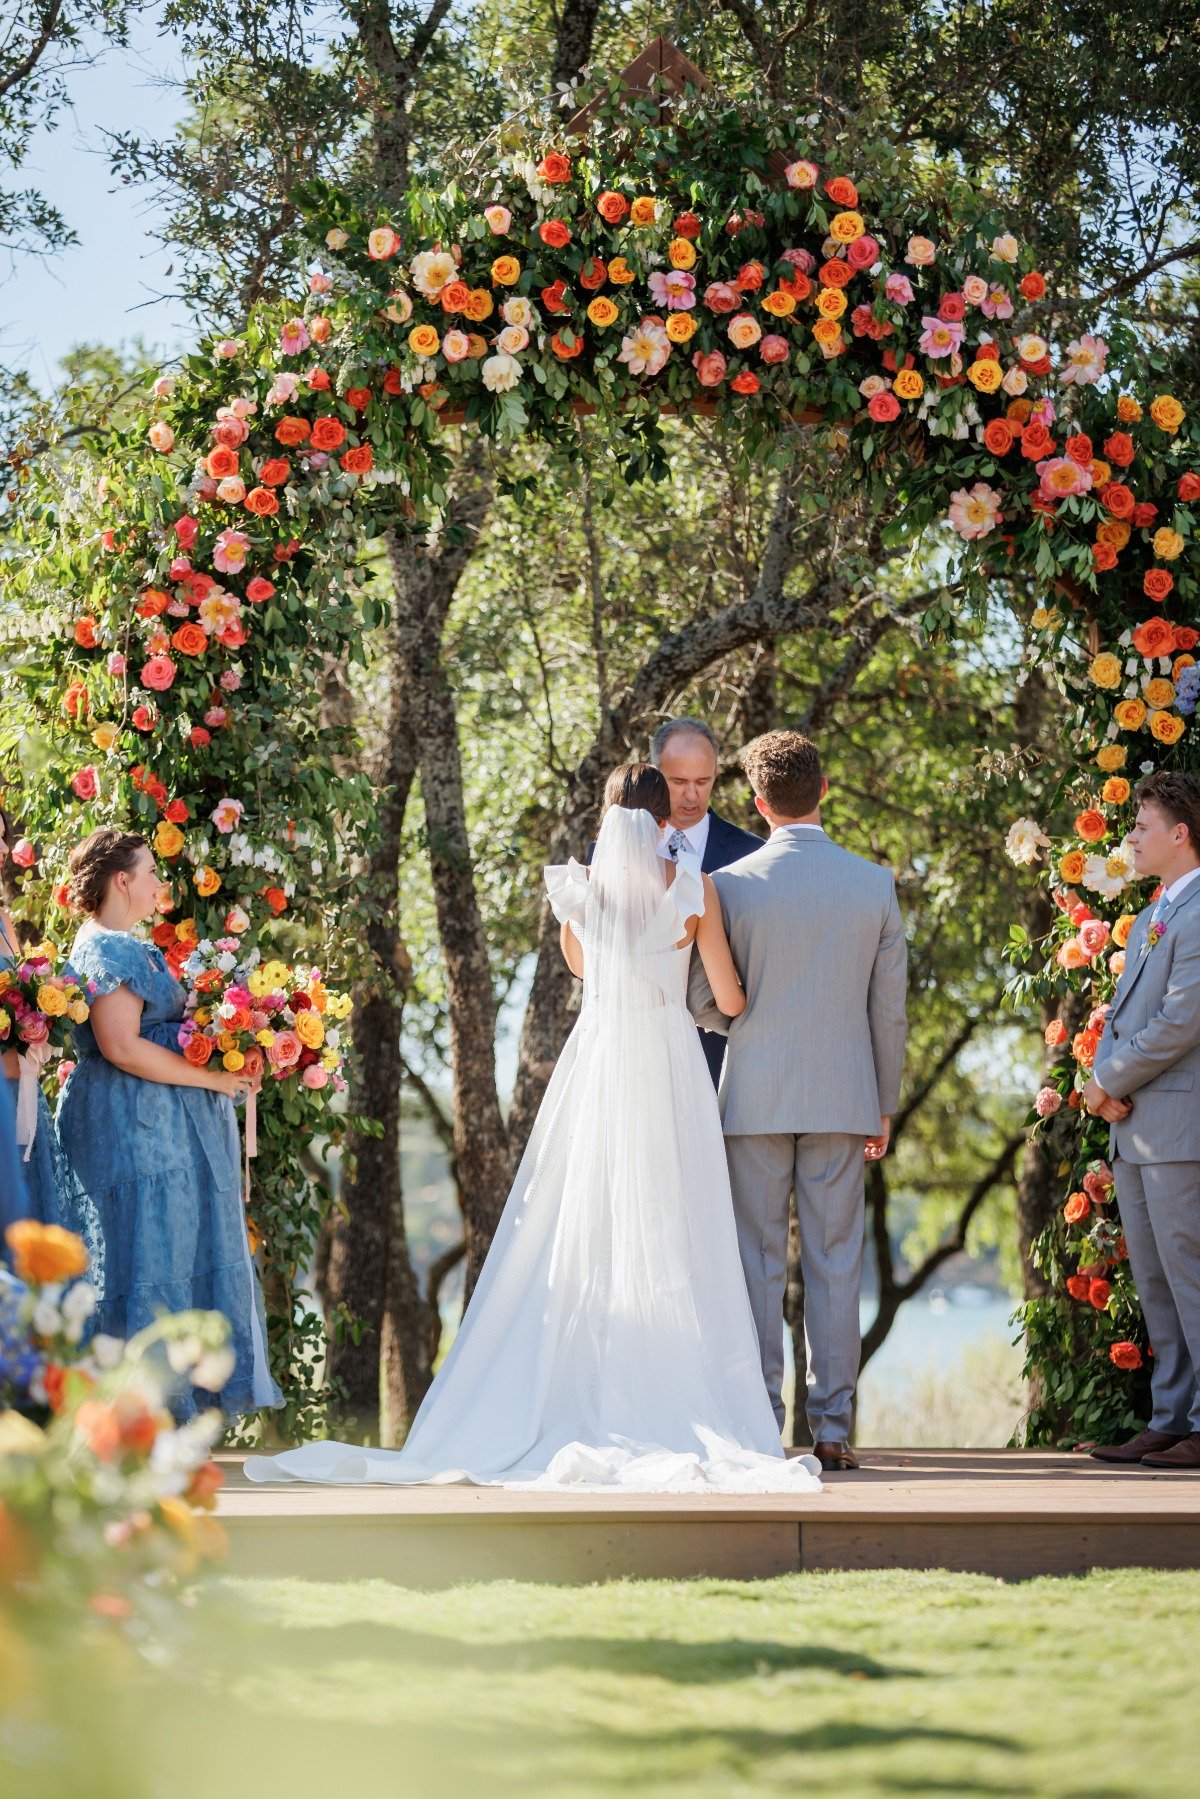 large citrus-inspired floral arch